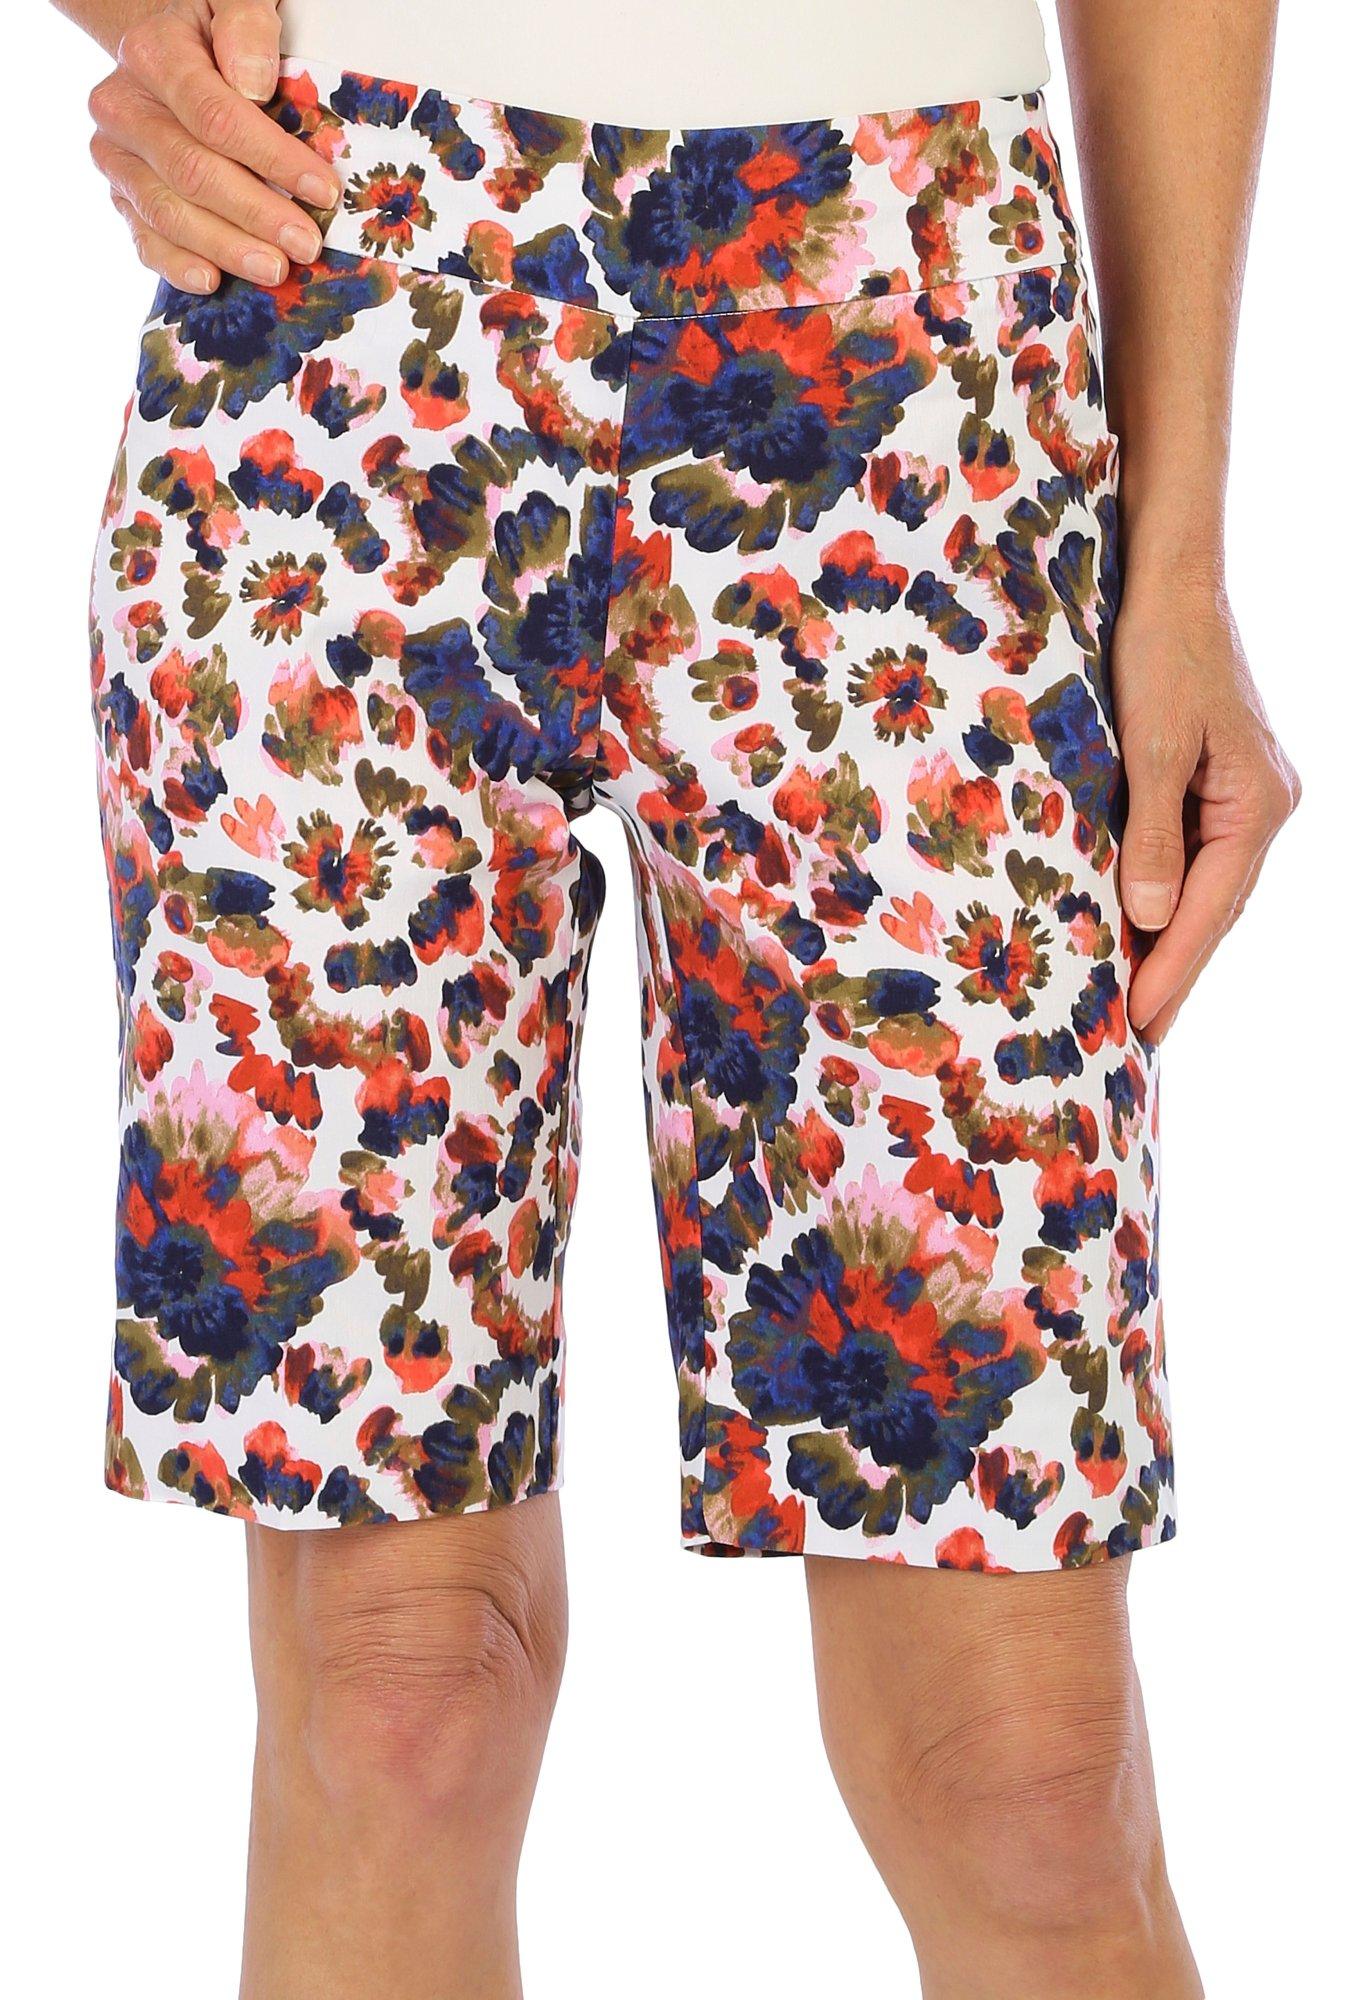 Juniper + Lime Petite 11 in. Abstract Print Petitie Shorts